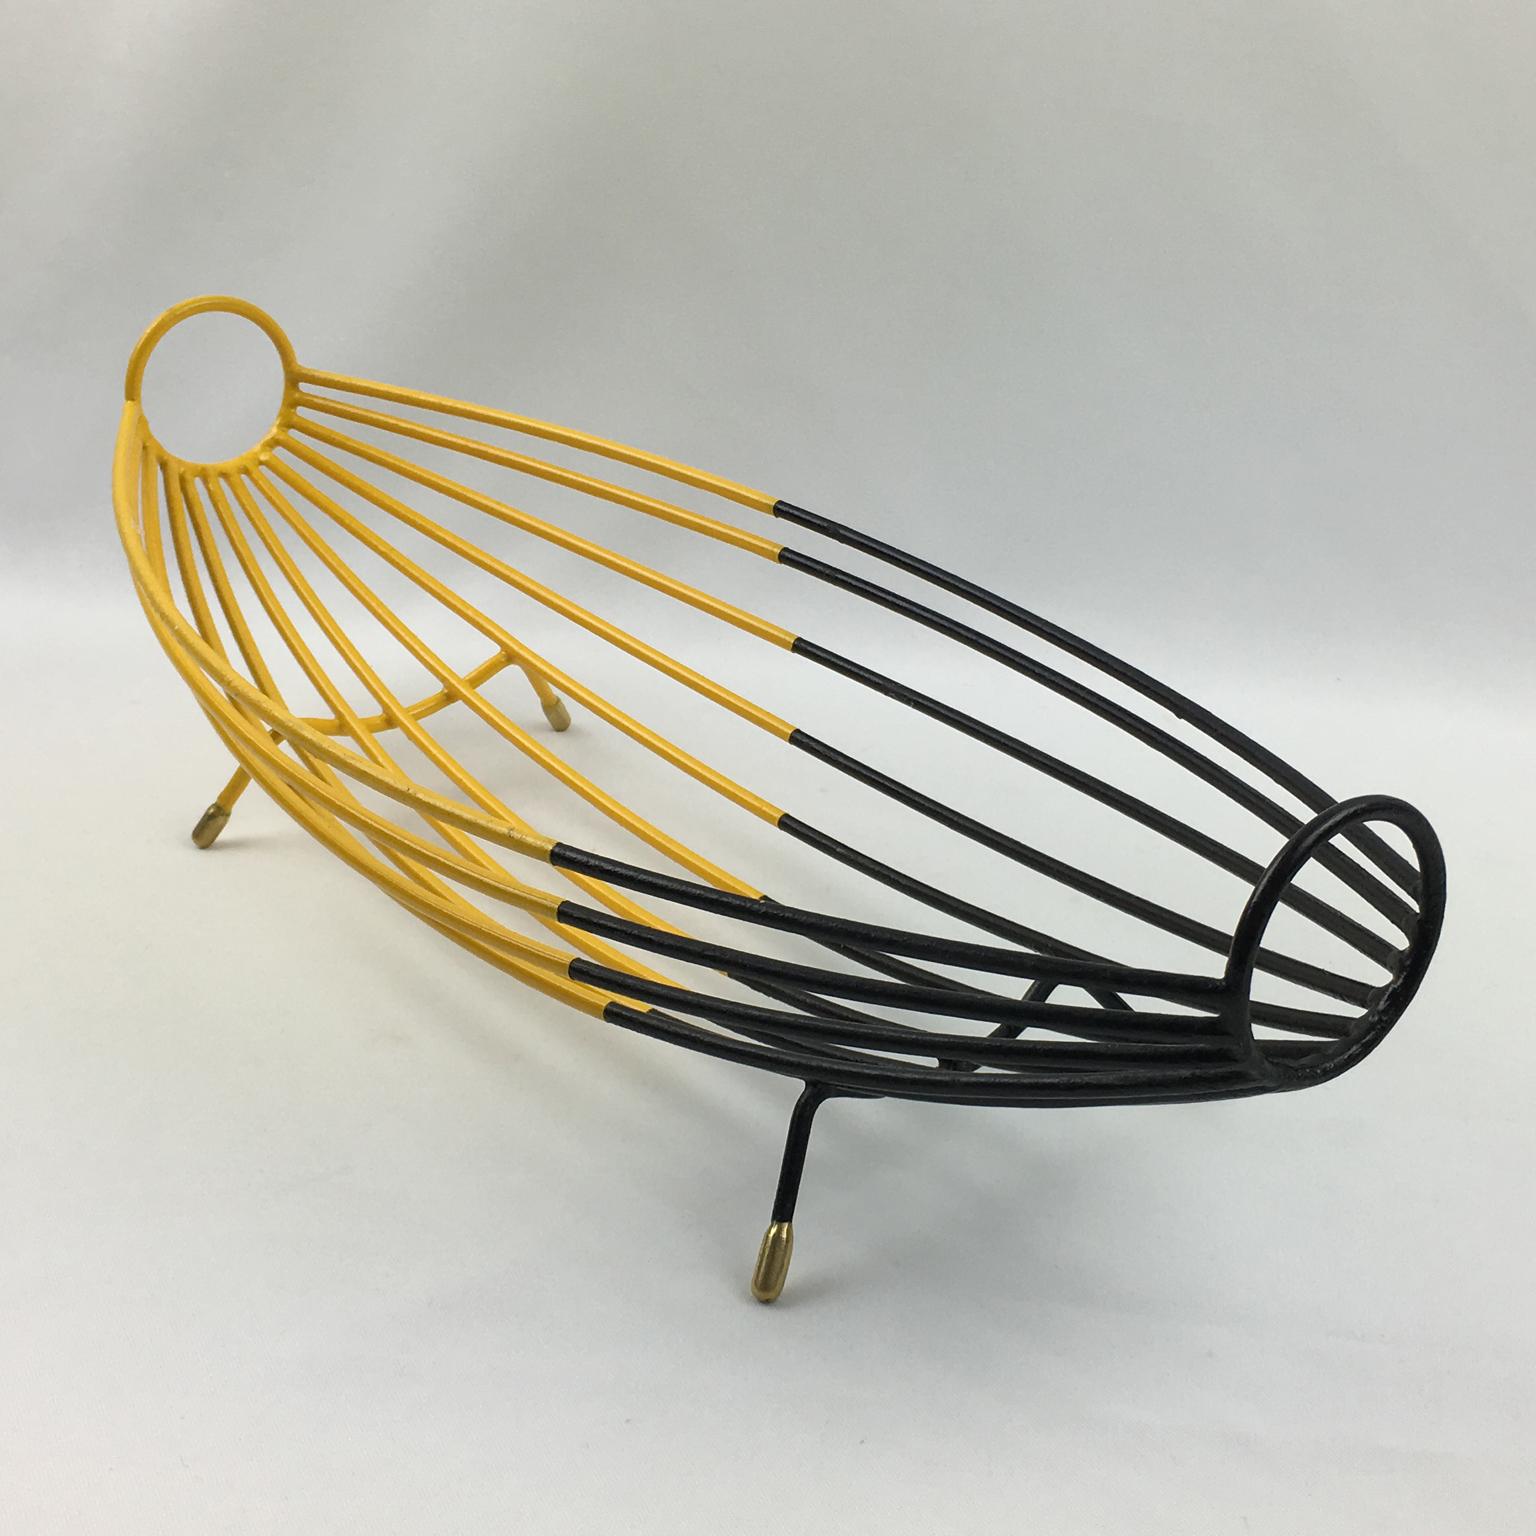 Handsome 1960s modernist metal fruit bowl or basket or centerpiece. Black and yellow lacquered paint patina with polished brass feet. Elongated hammock shape with thin metal rods. Bi-color geometric design. No visible maker's mark.
Measurements: 15